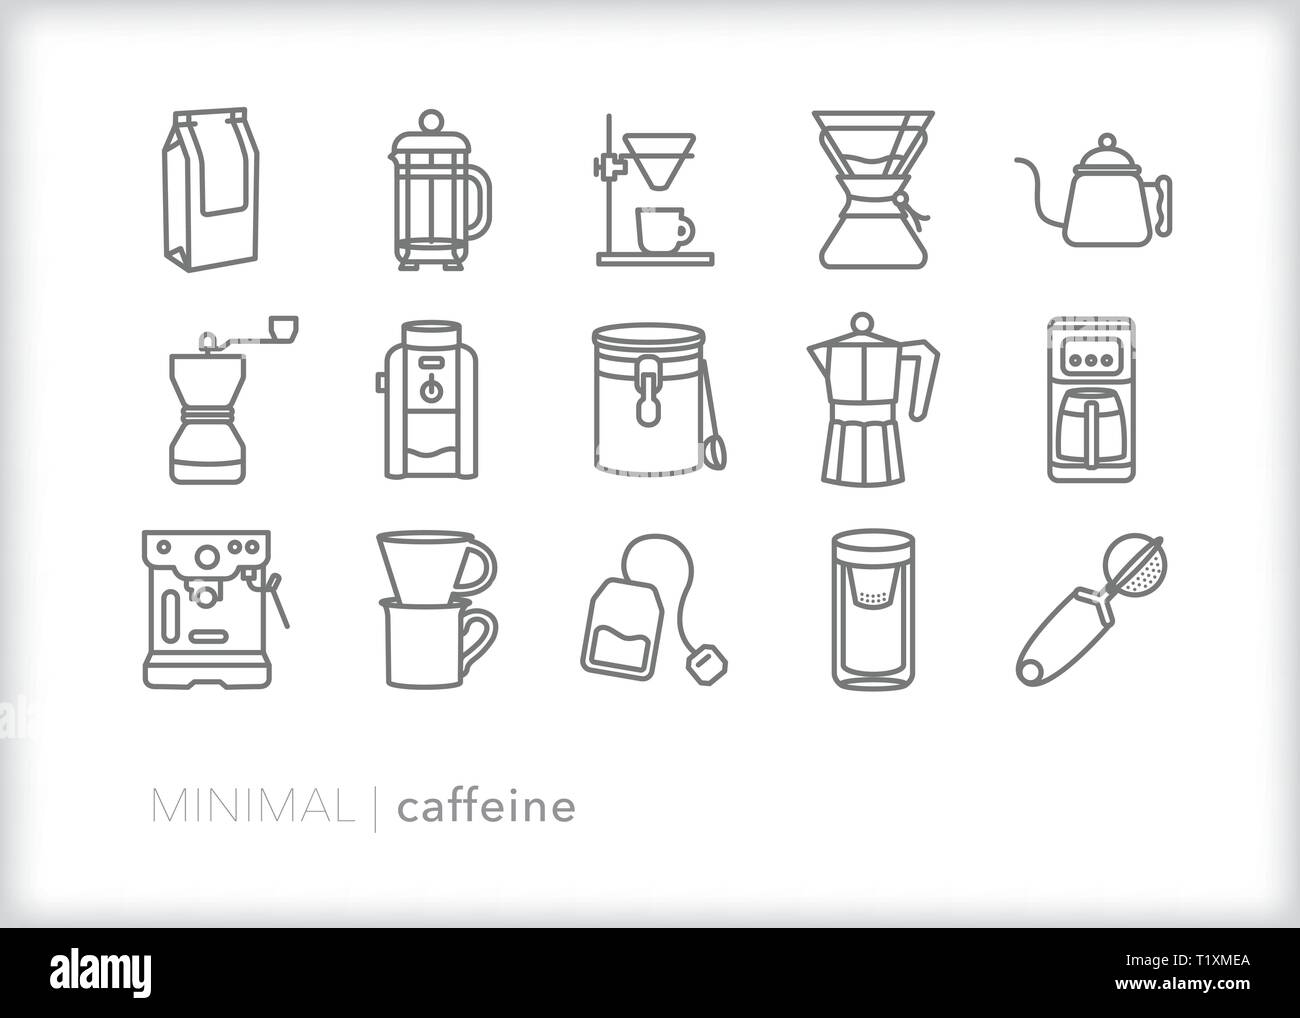 Set of 15 caffeine line icons of items for brewing and drinking coffee and tea Stock Vector